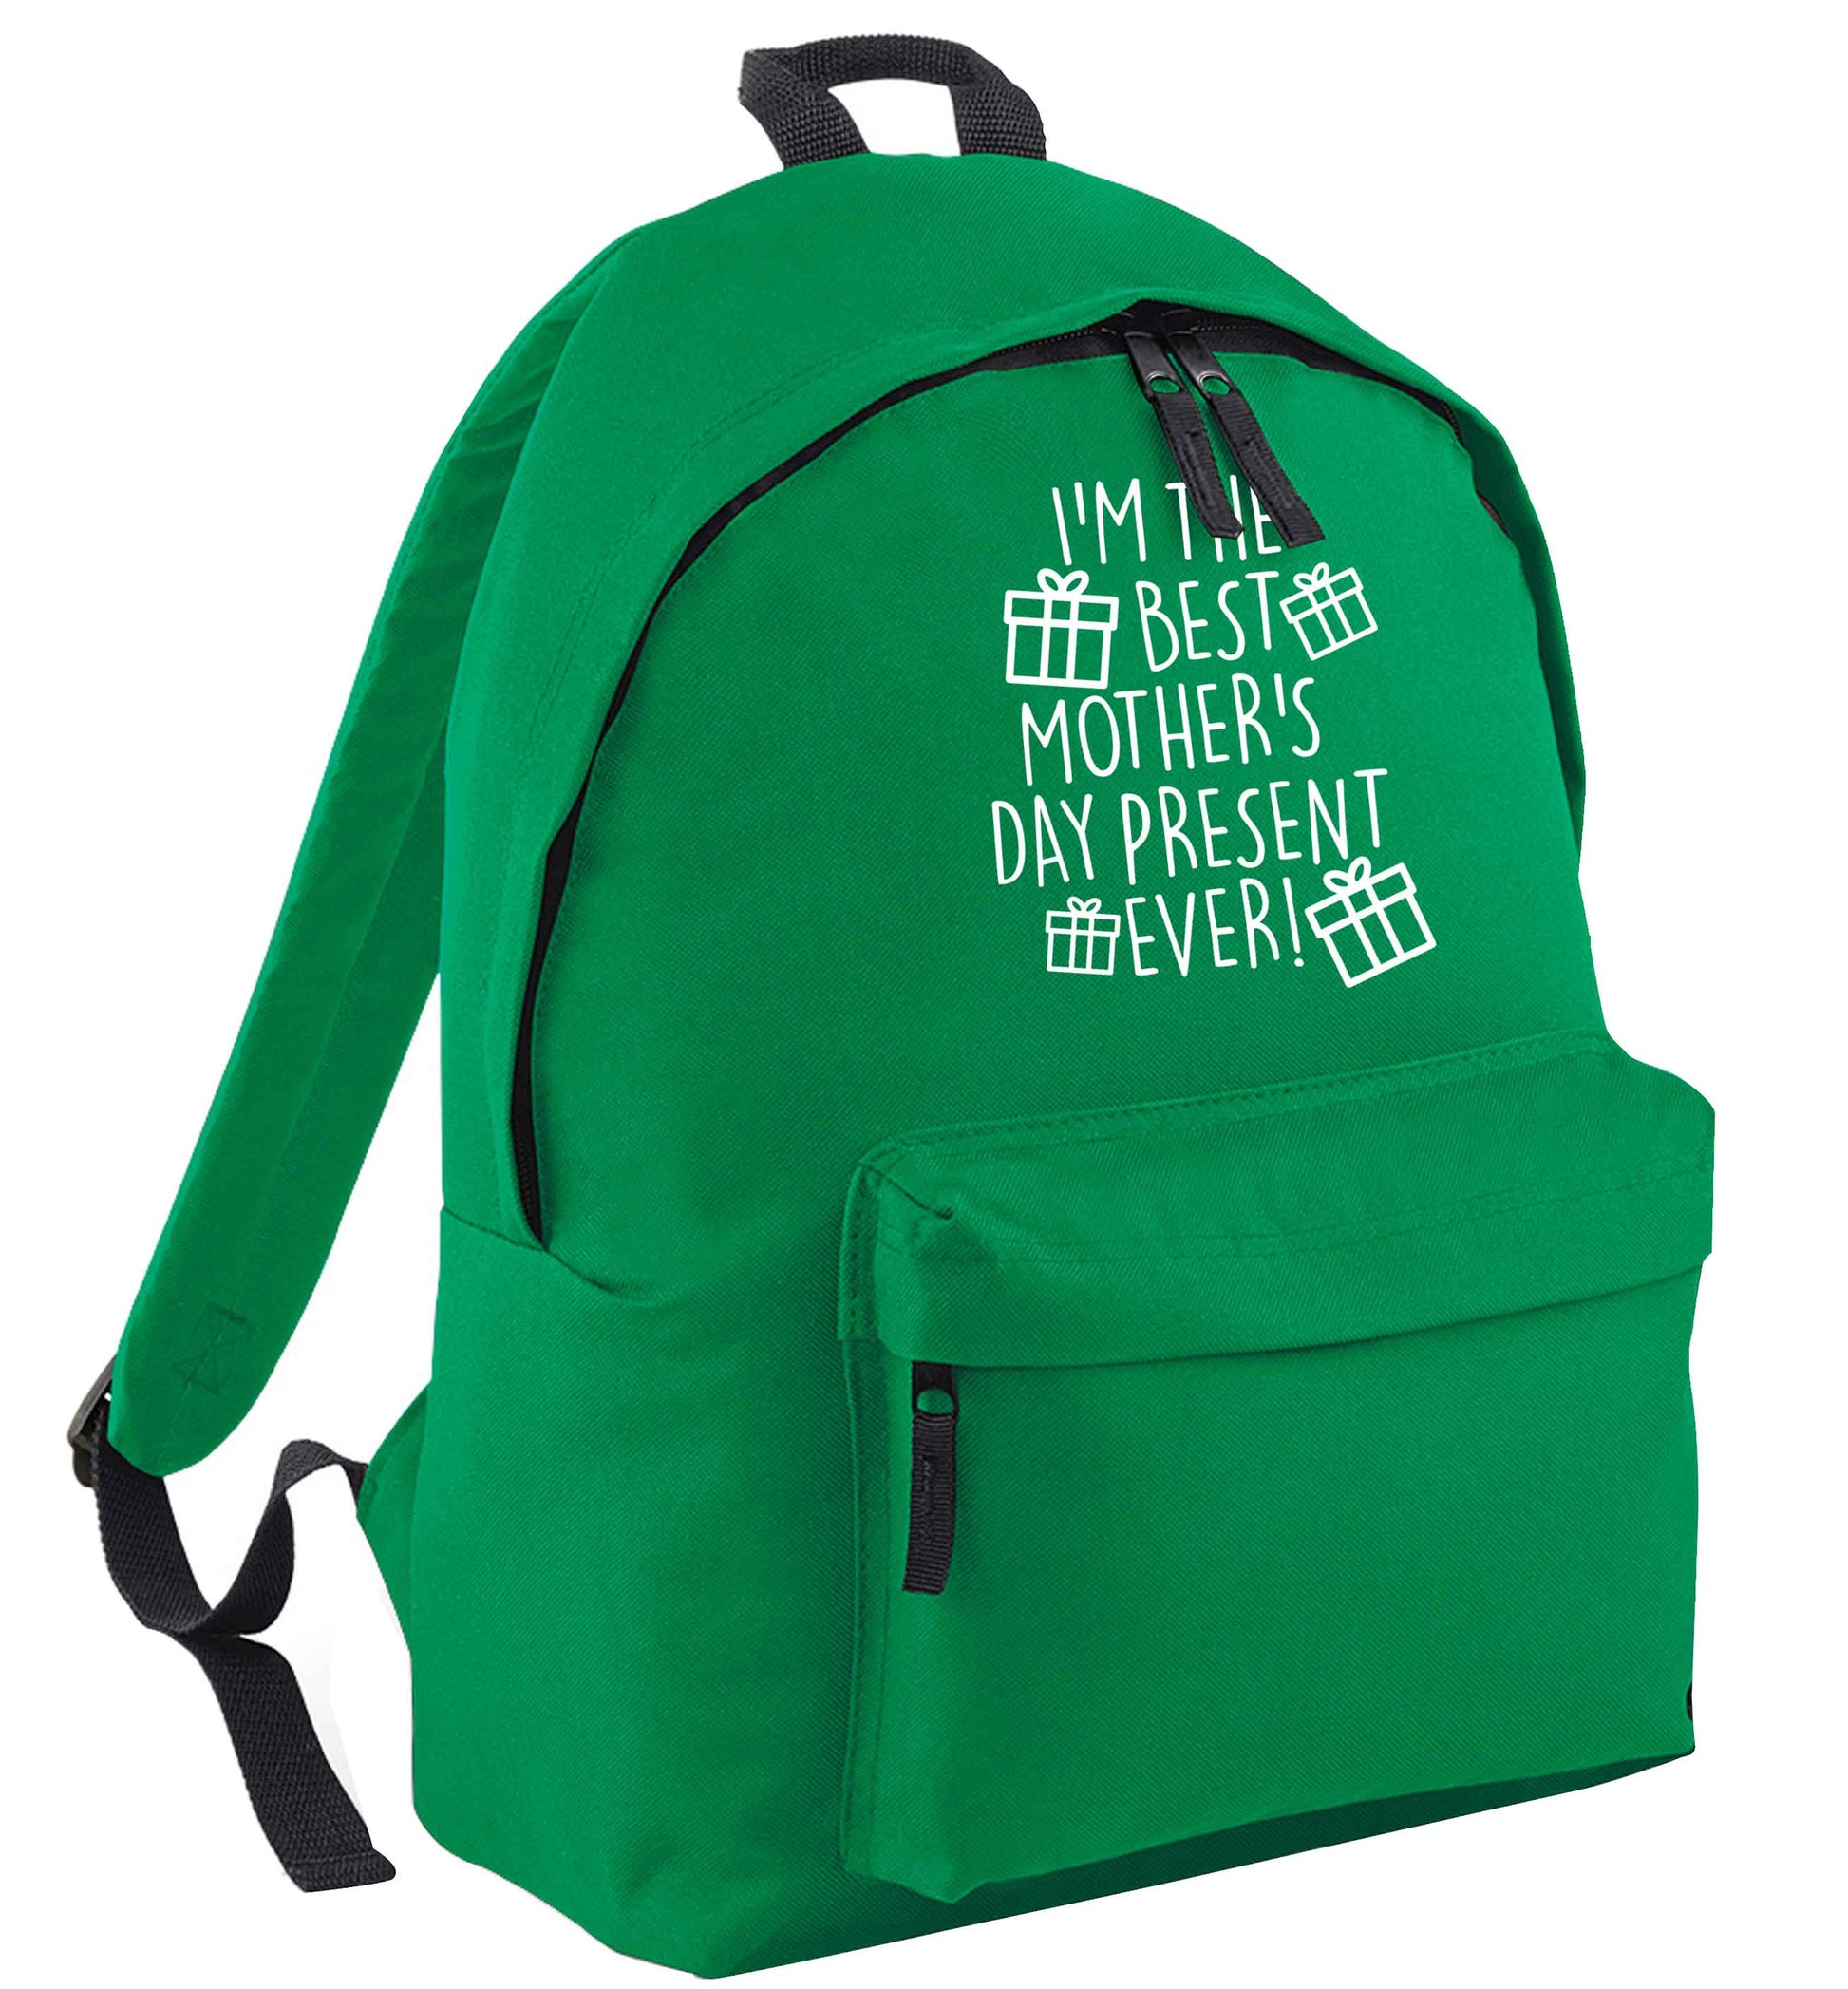 I'm the best mother's day present ever! green adults backpack